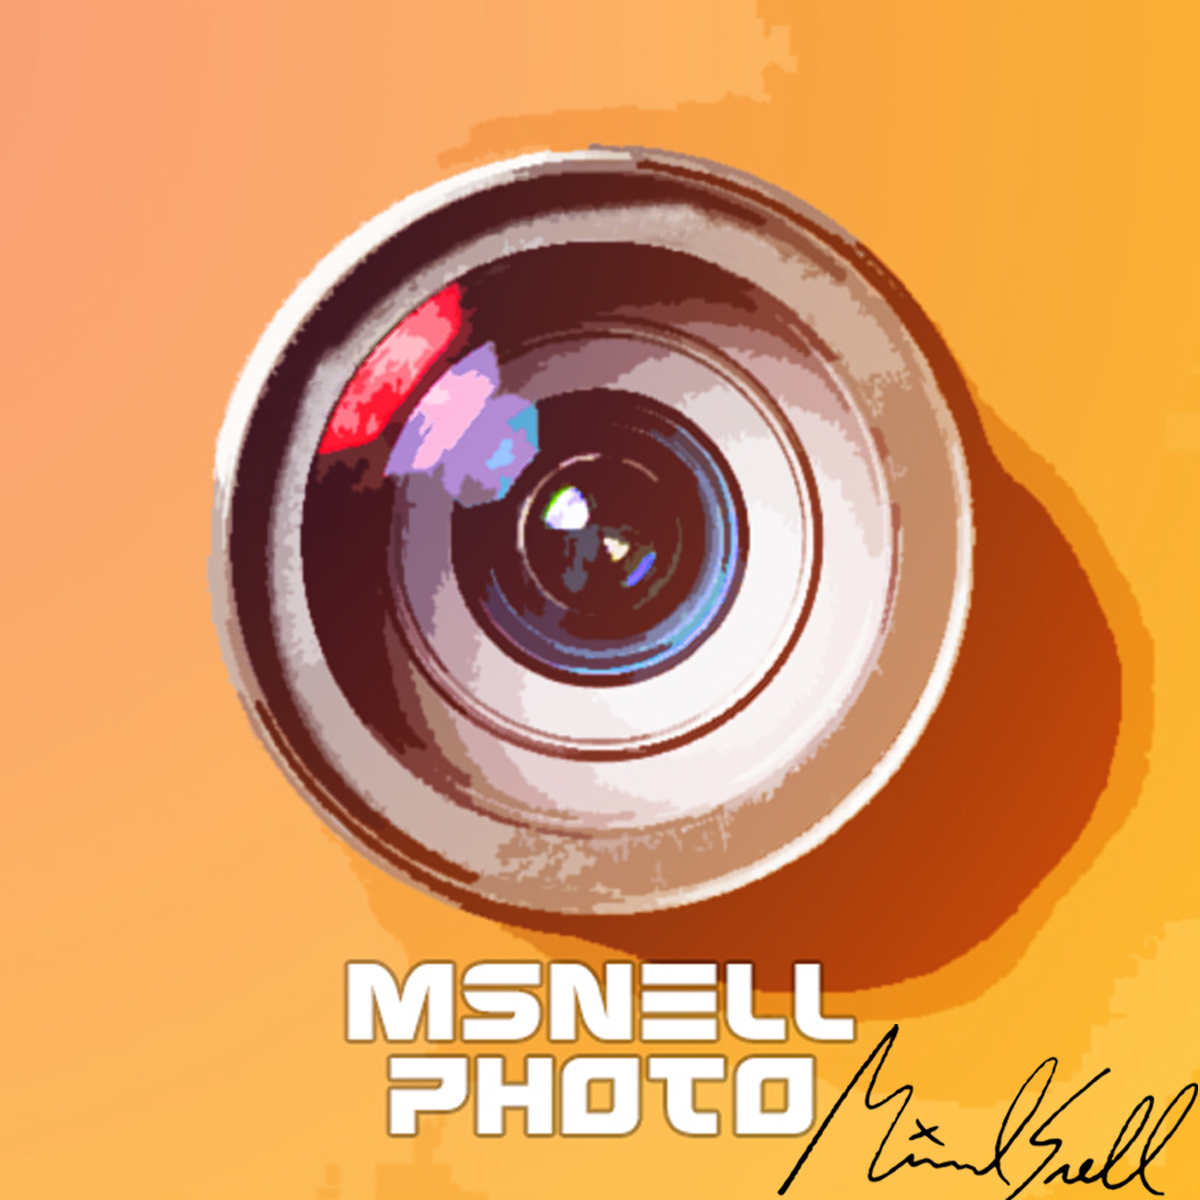 msnell photo icon